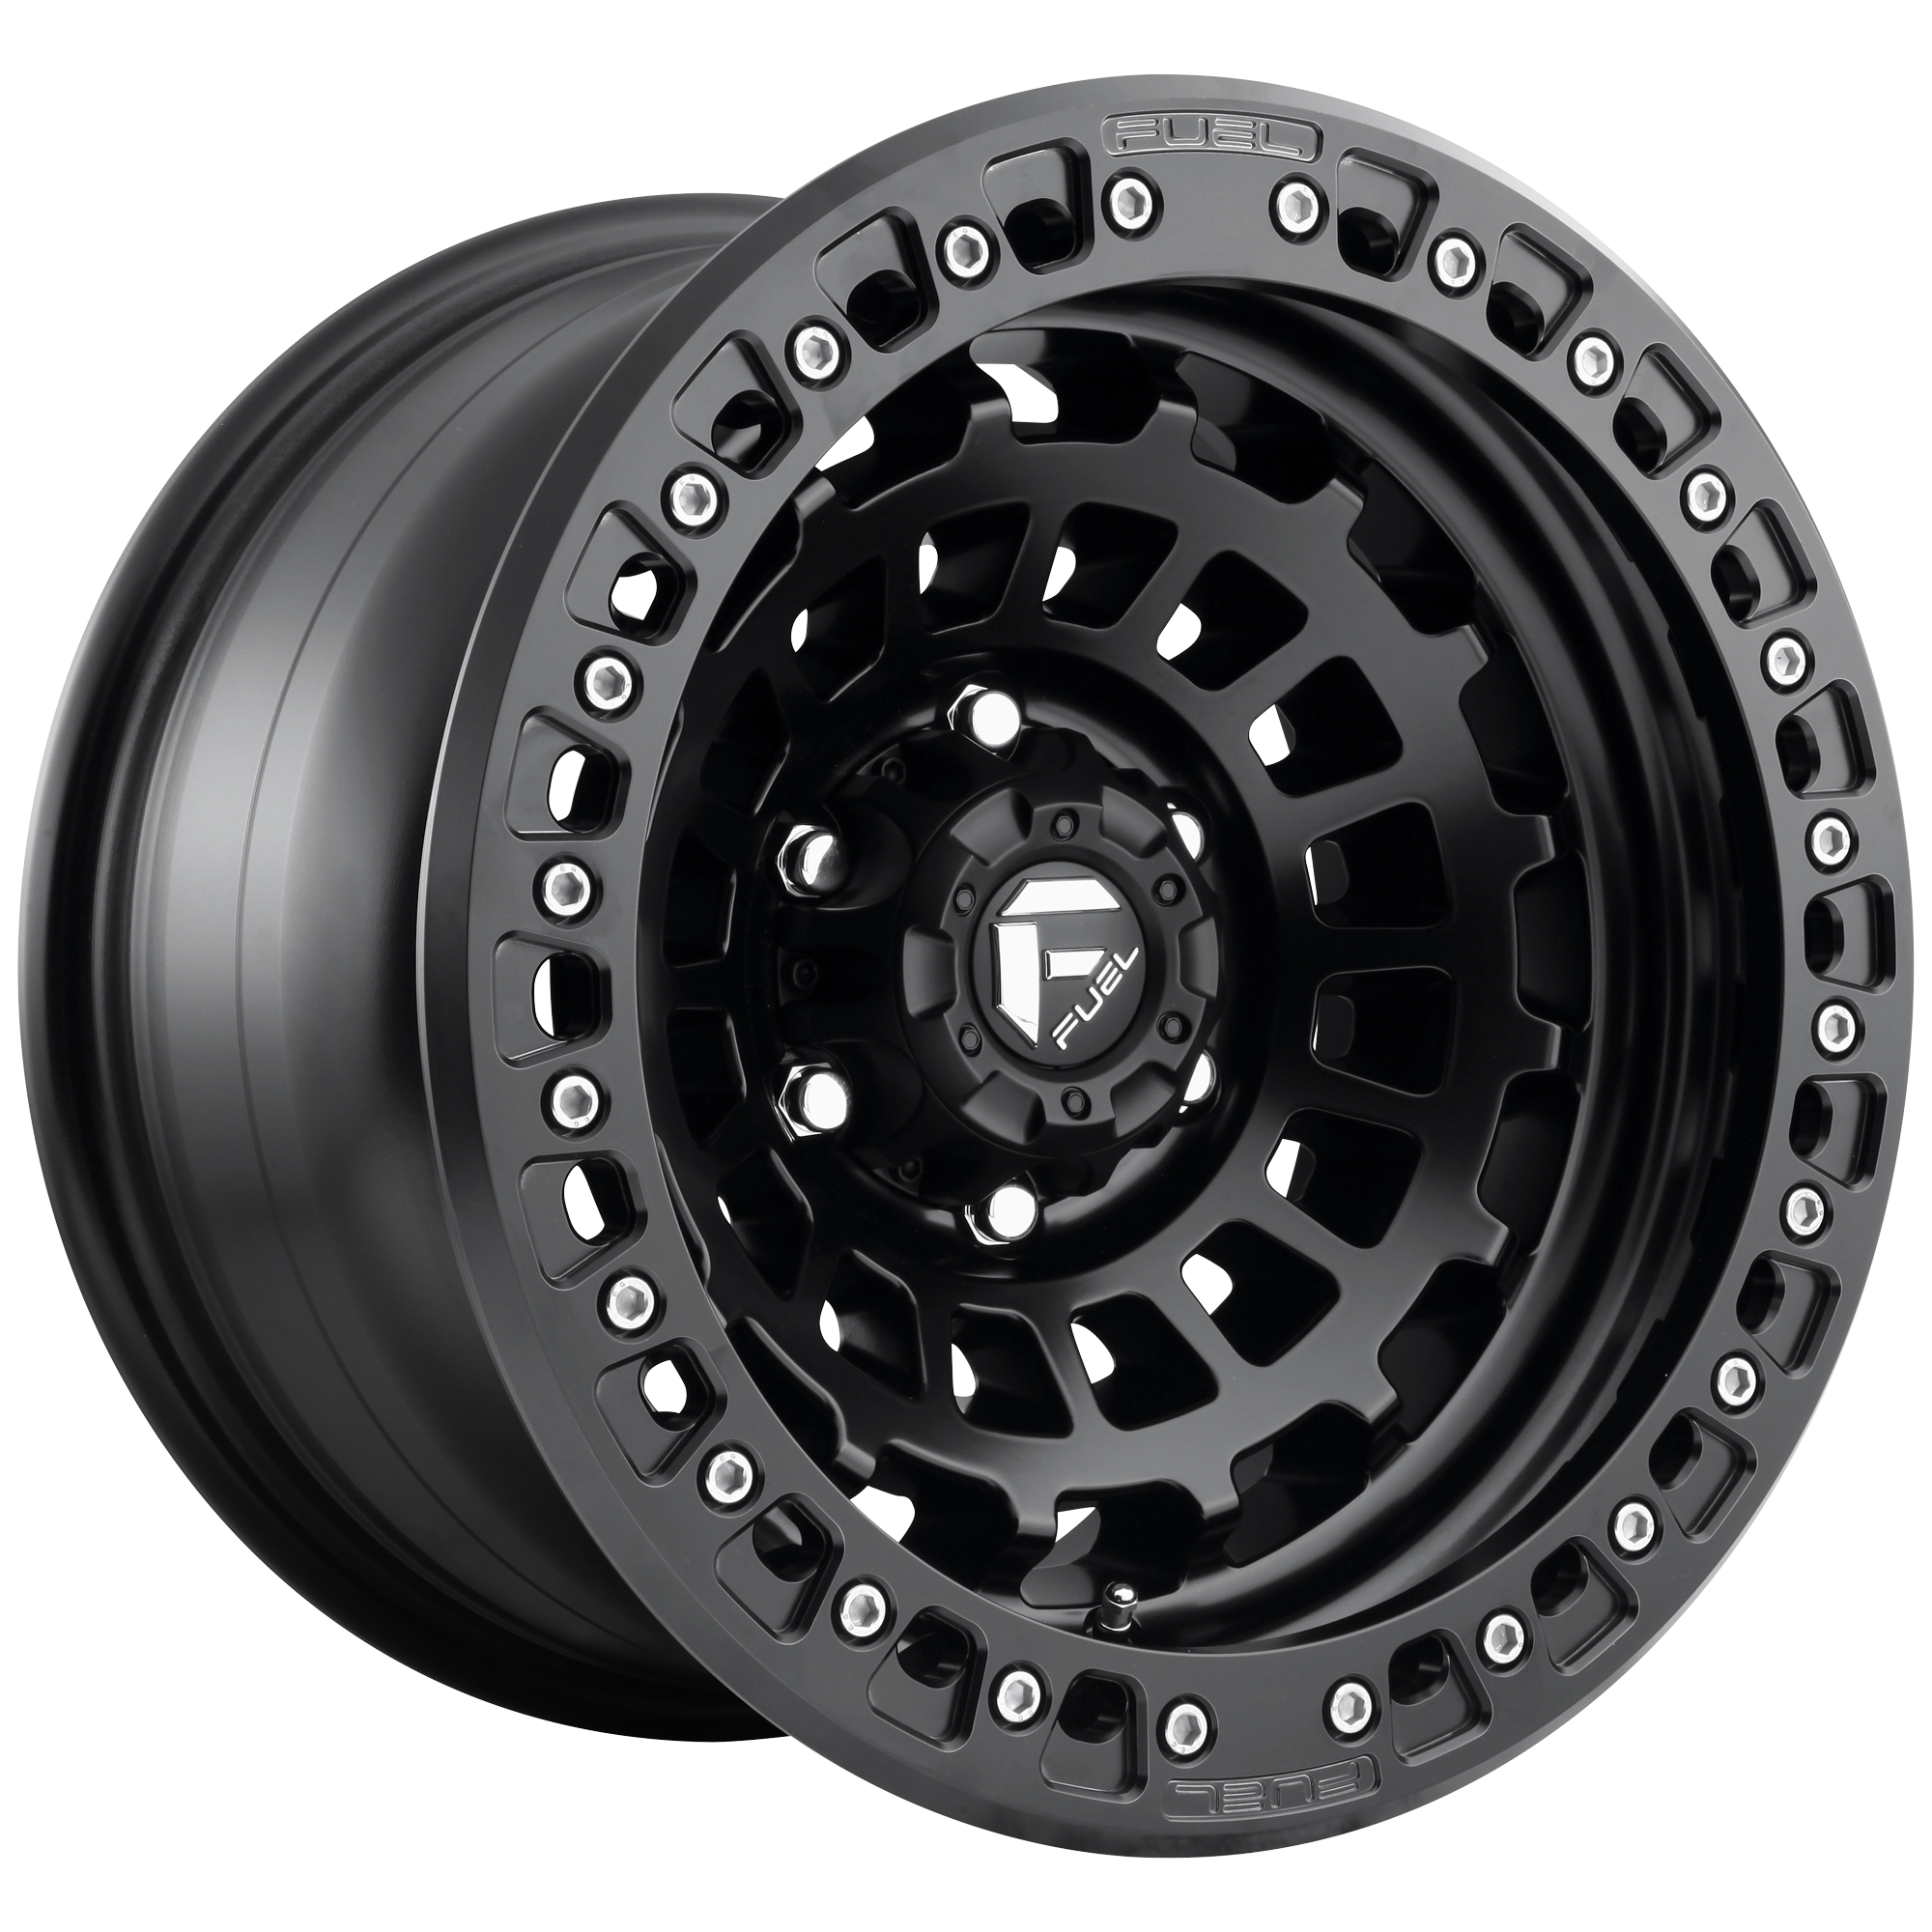 ZEPHYR BL - OFF ROAD ONLY 17x9 6x135.00 MATTE BLACK (-15 mm) - Tires and Engine Performance